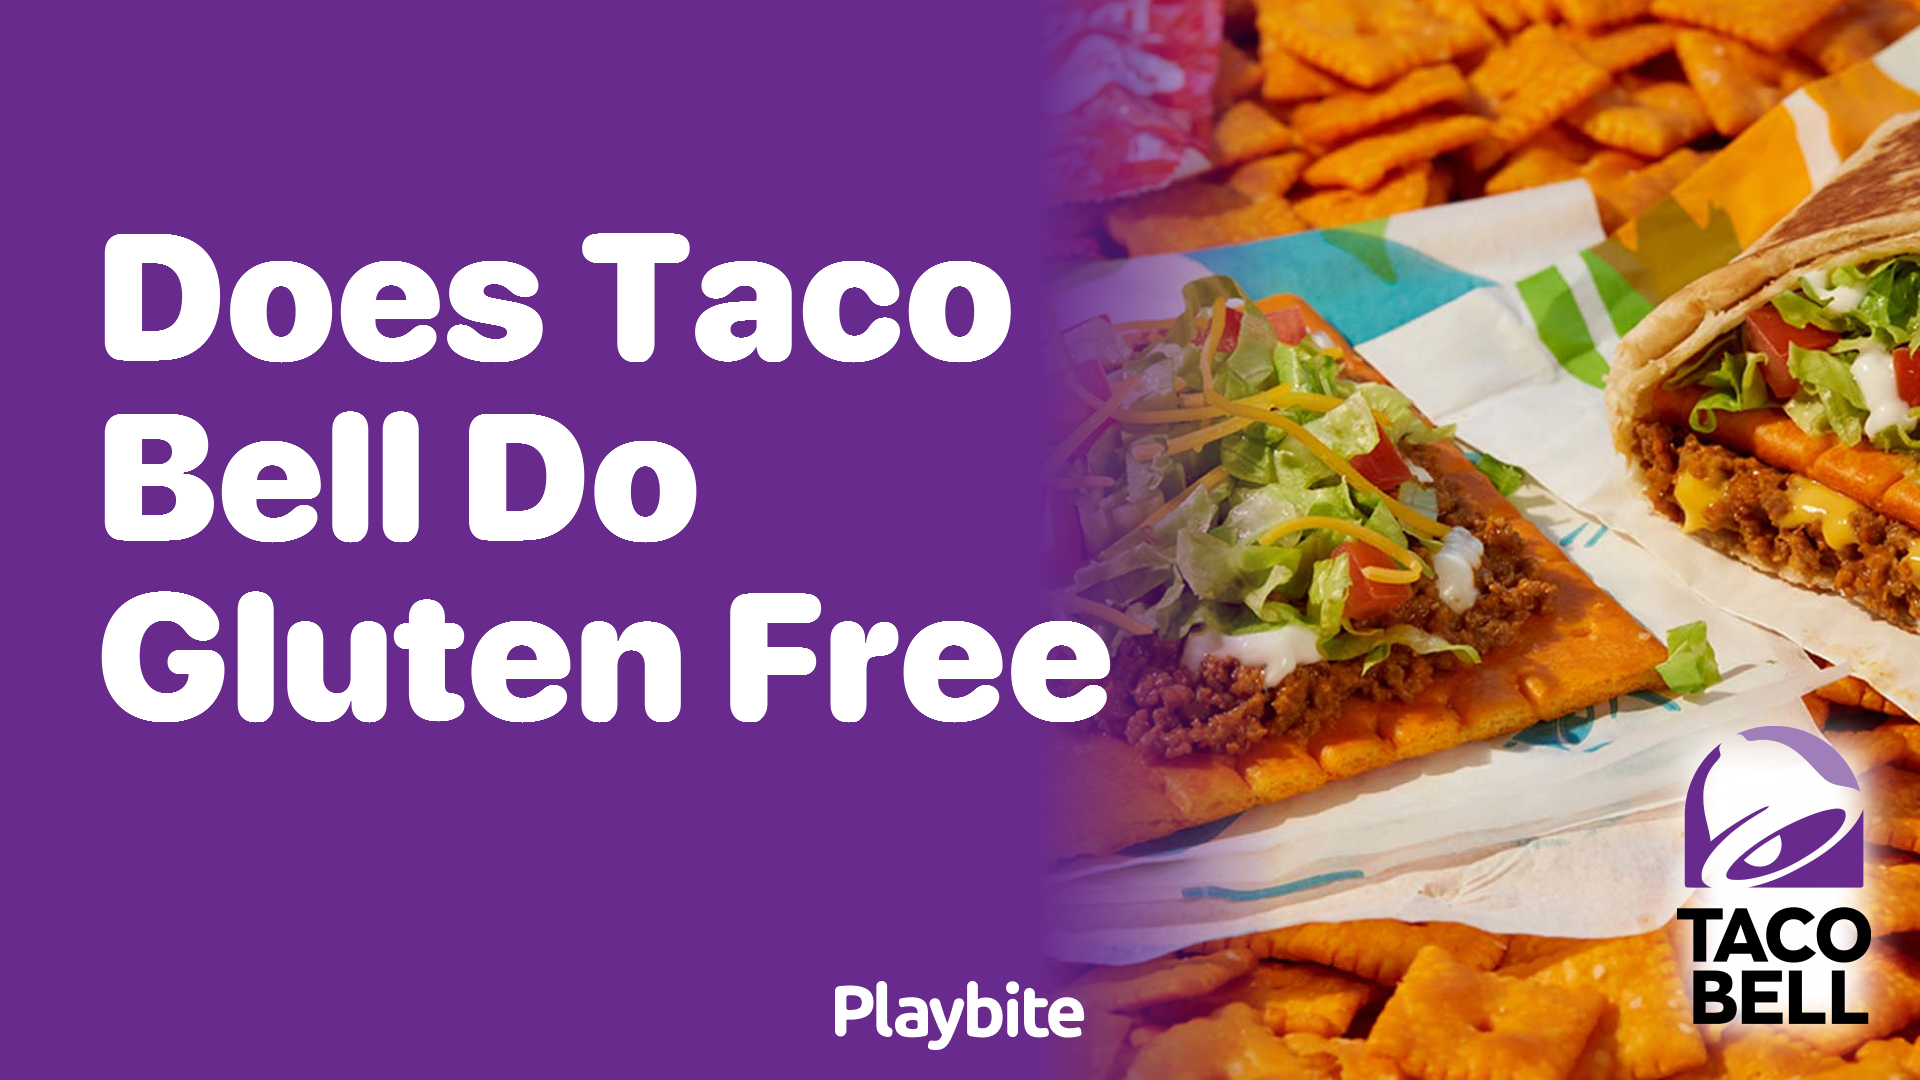 Does Taco Bell Offer Gluten-Free Options?